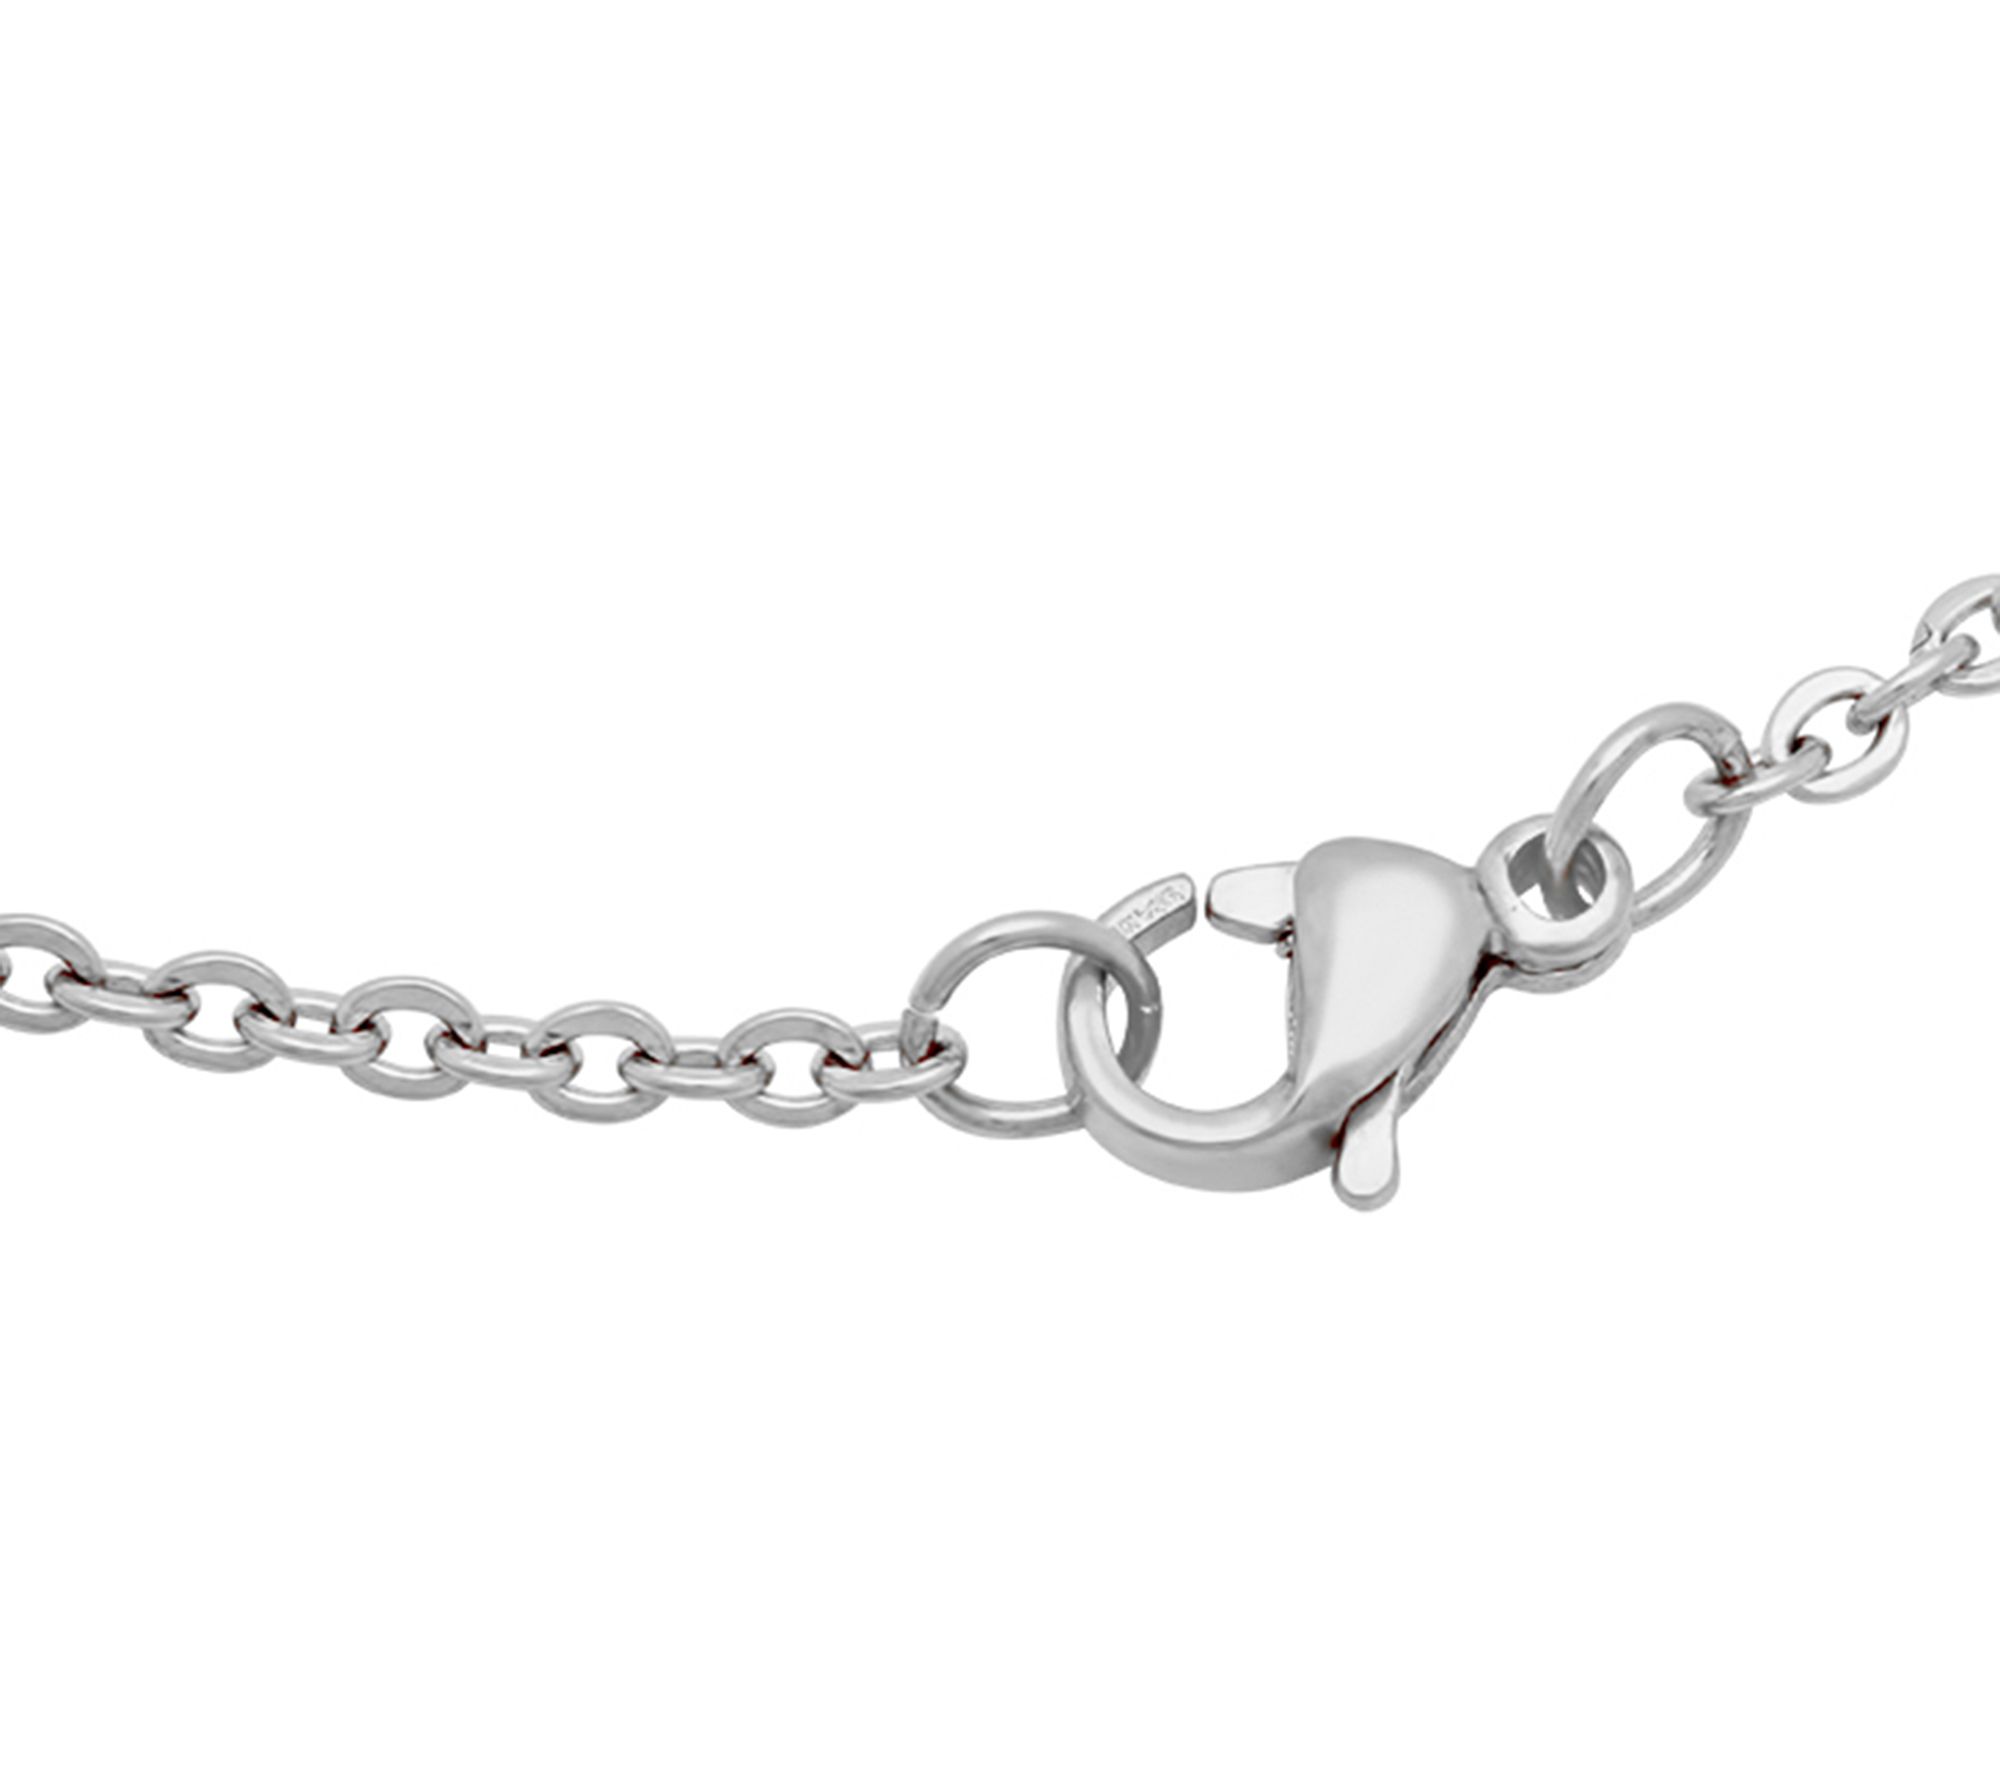 Stainless Steel Crystal Clover Pendant w/ Chain - QVC.com